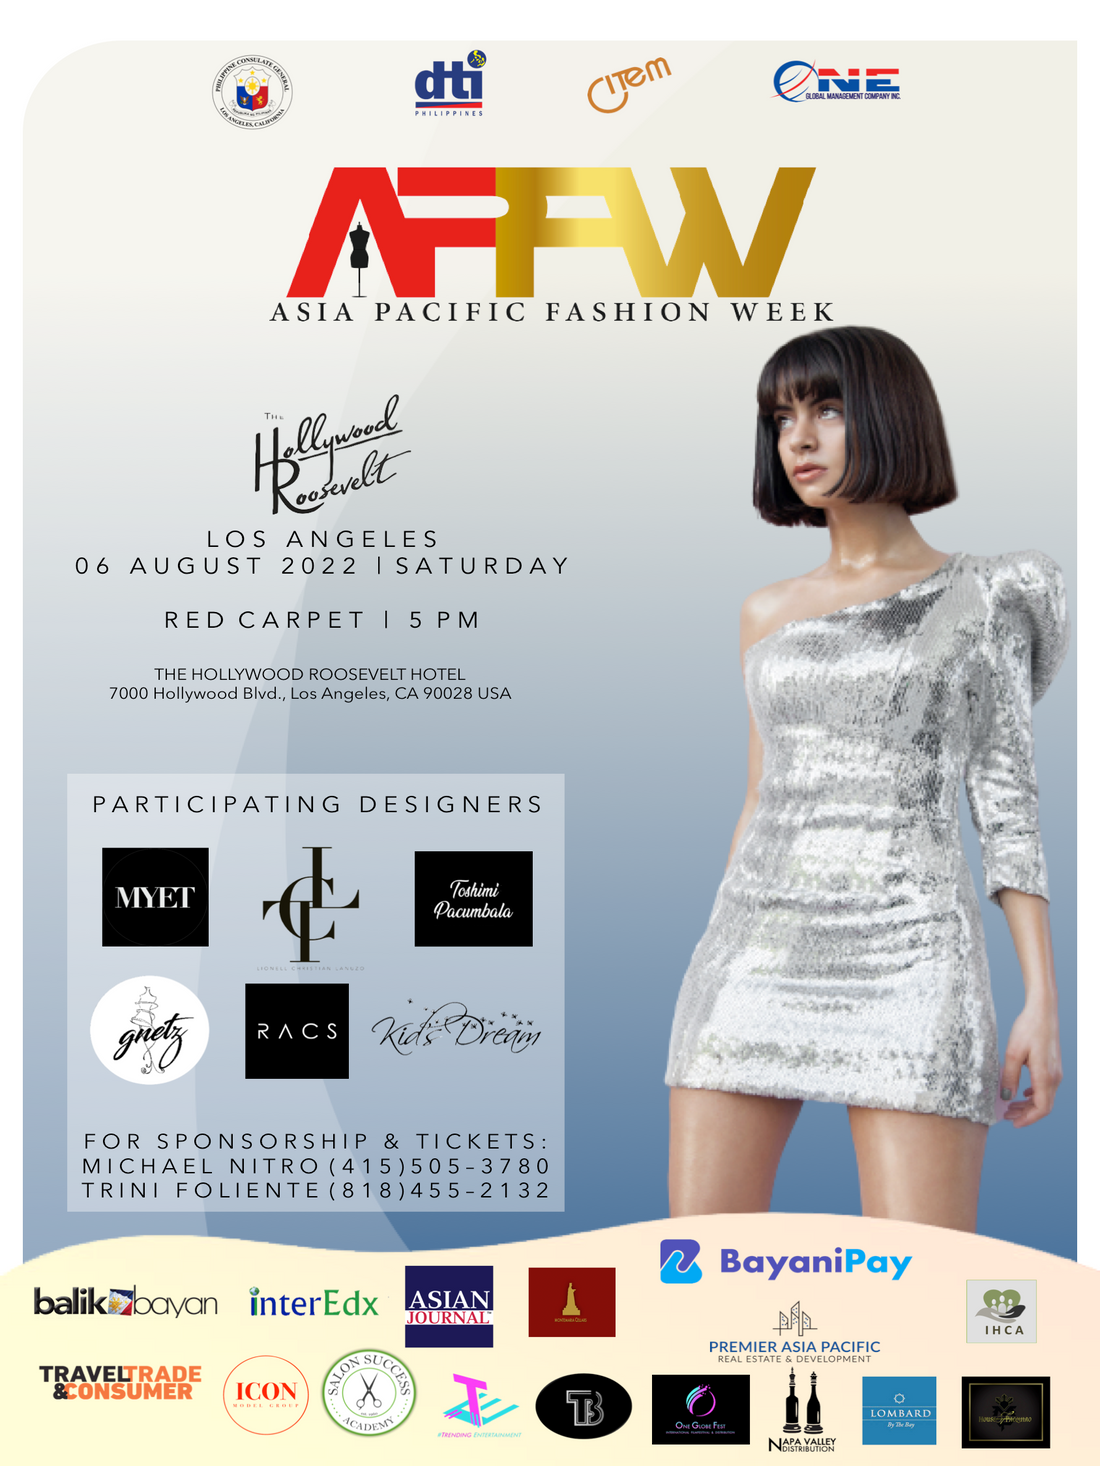 Kid's Dream will be at Asia Pacific Fashion Week | Kid's Casting Call for Show